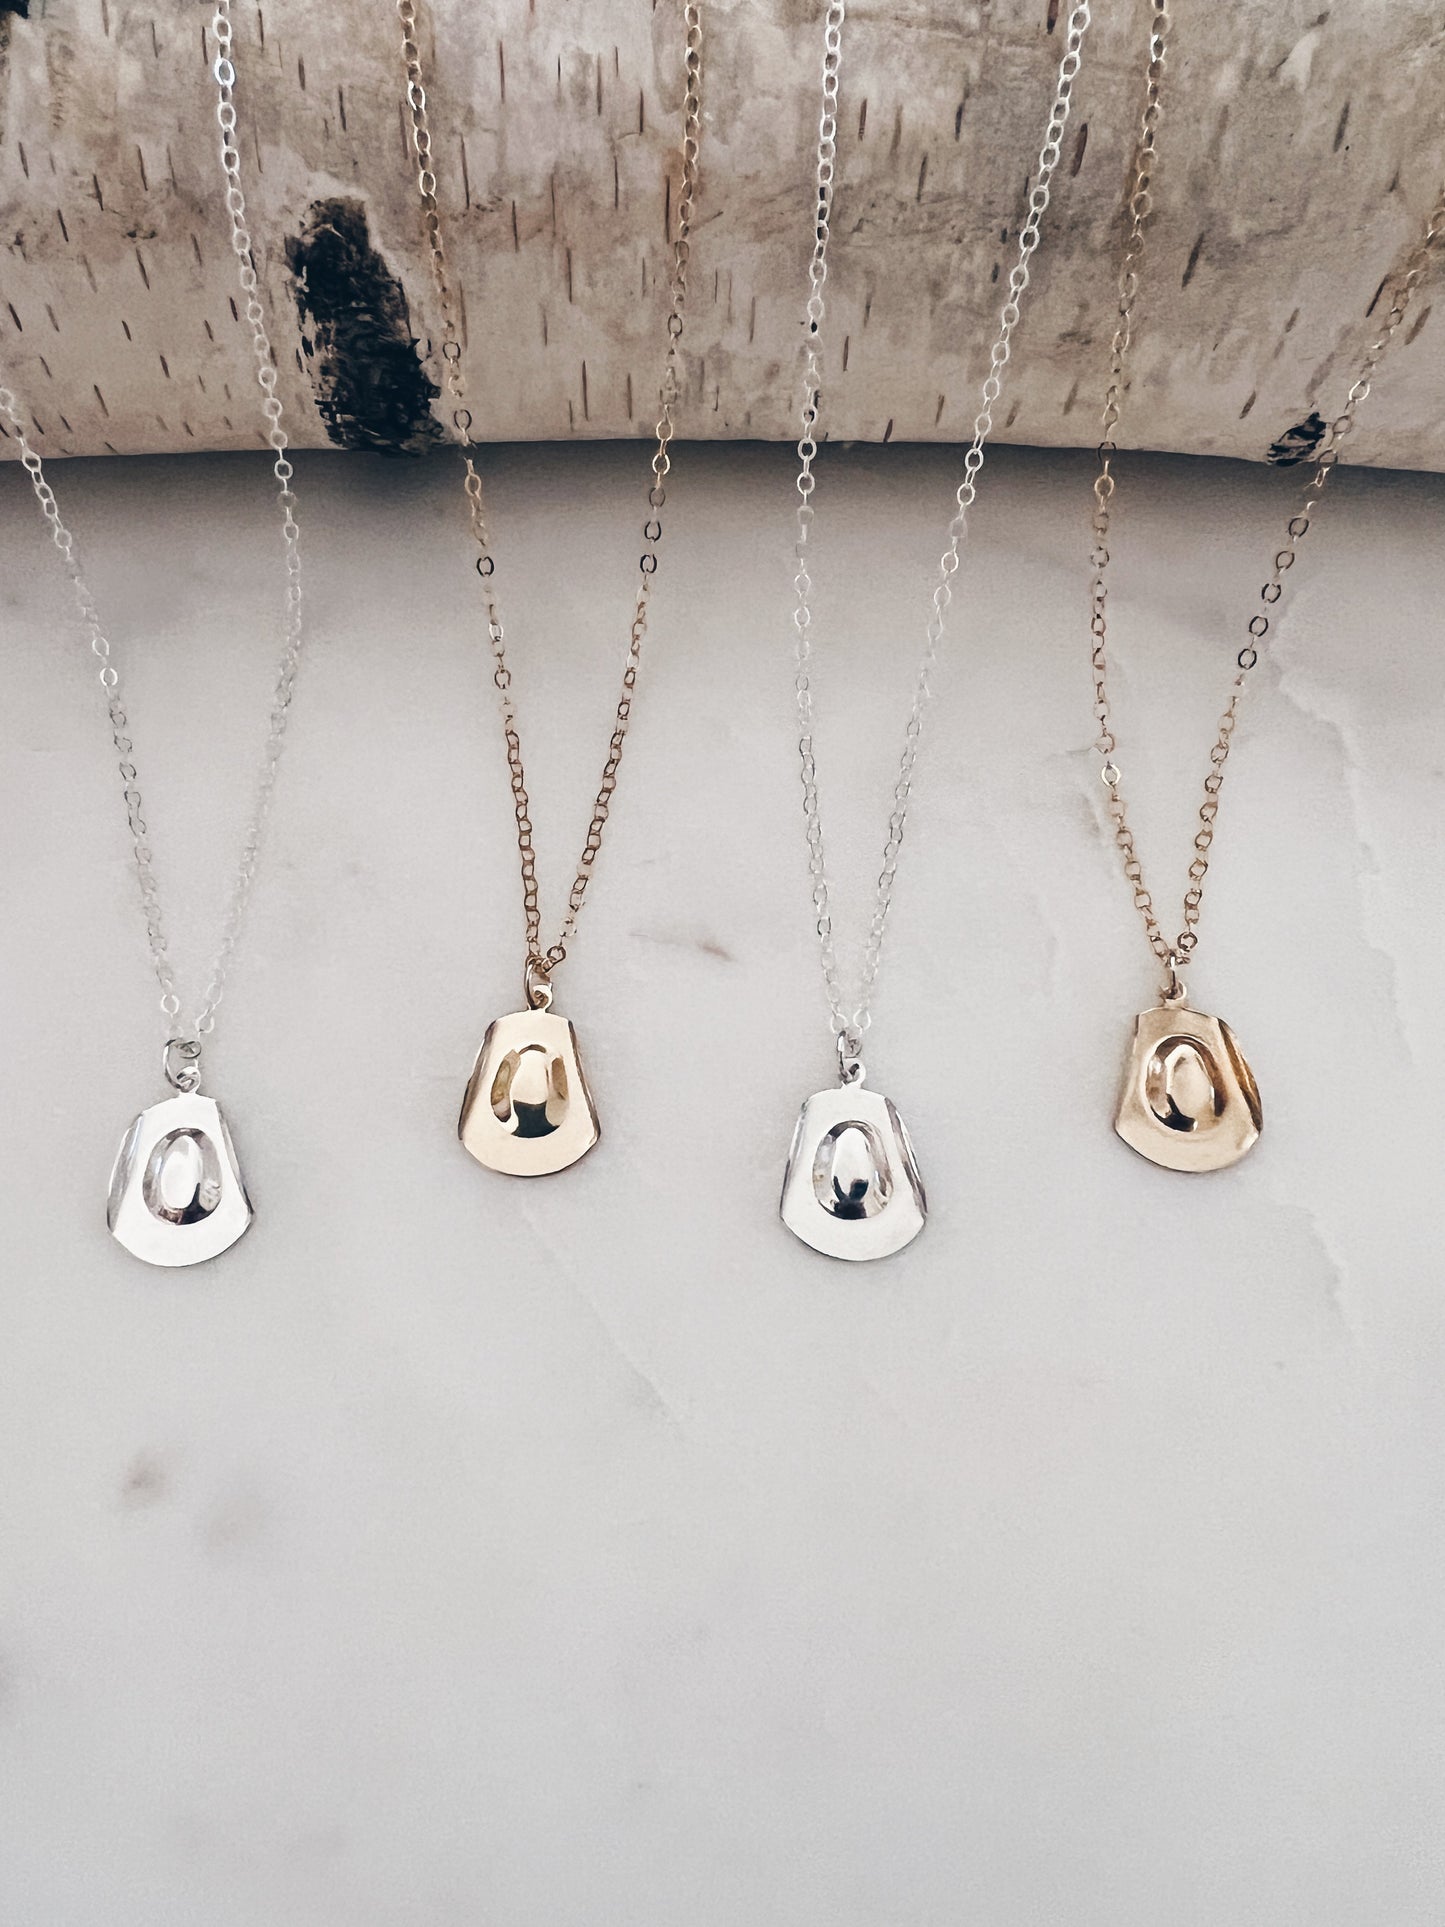 Giddy Up Necklace + More Options